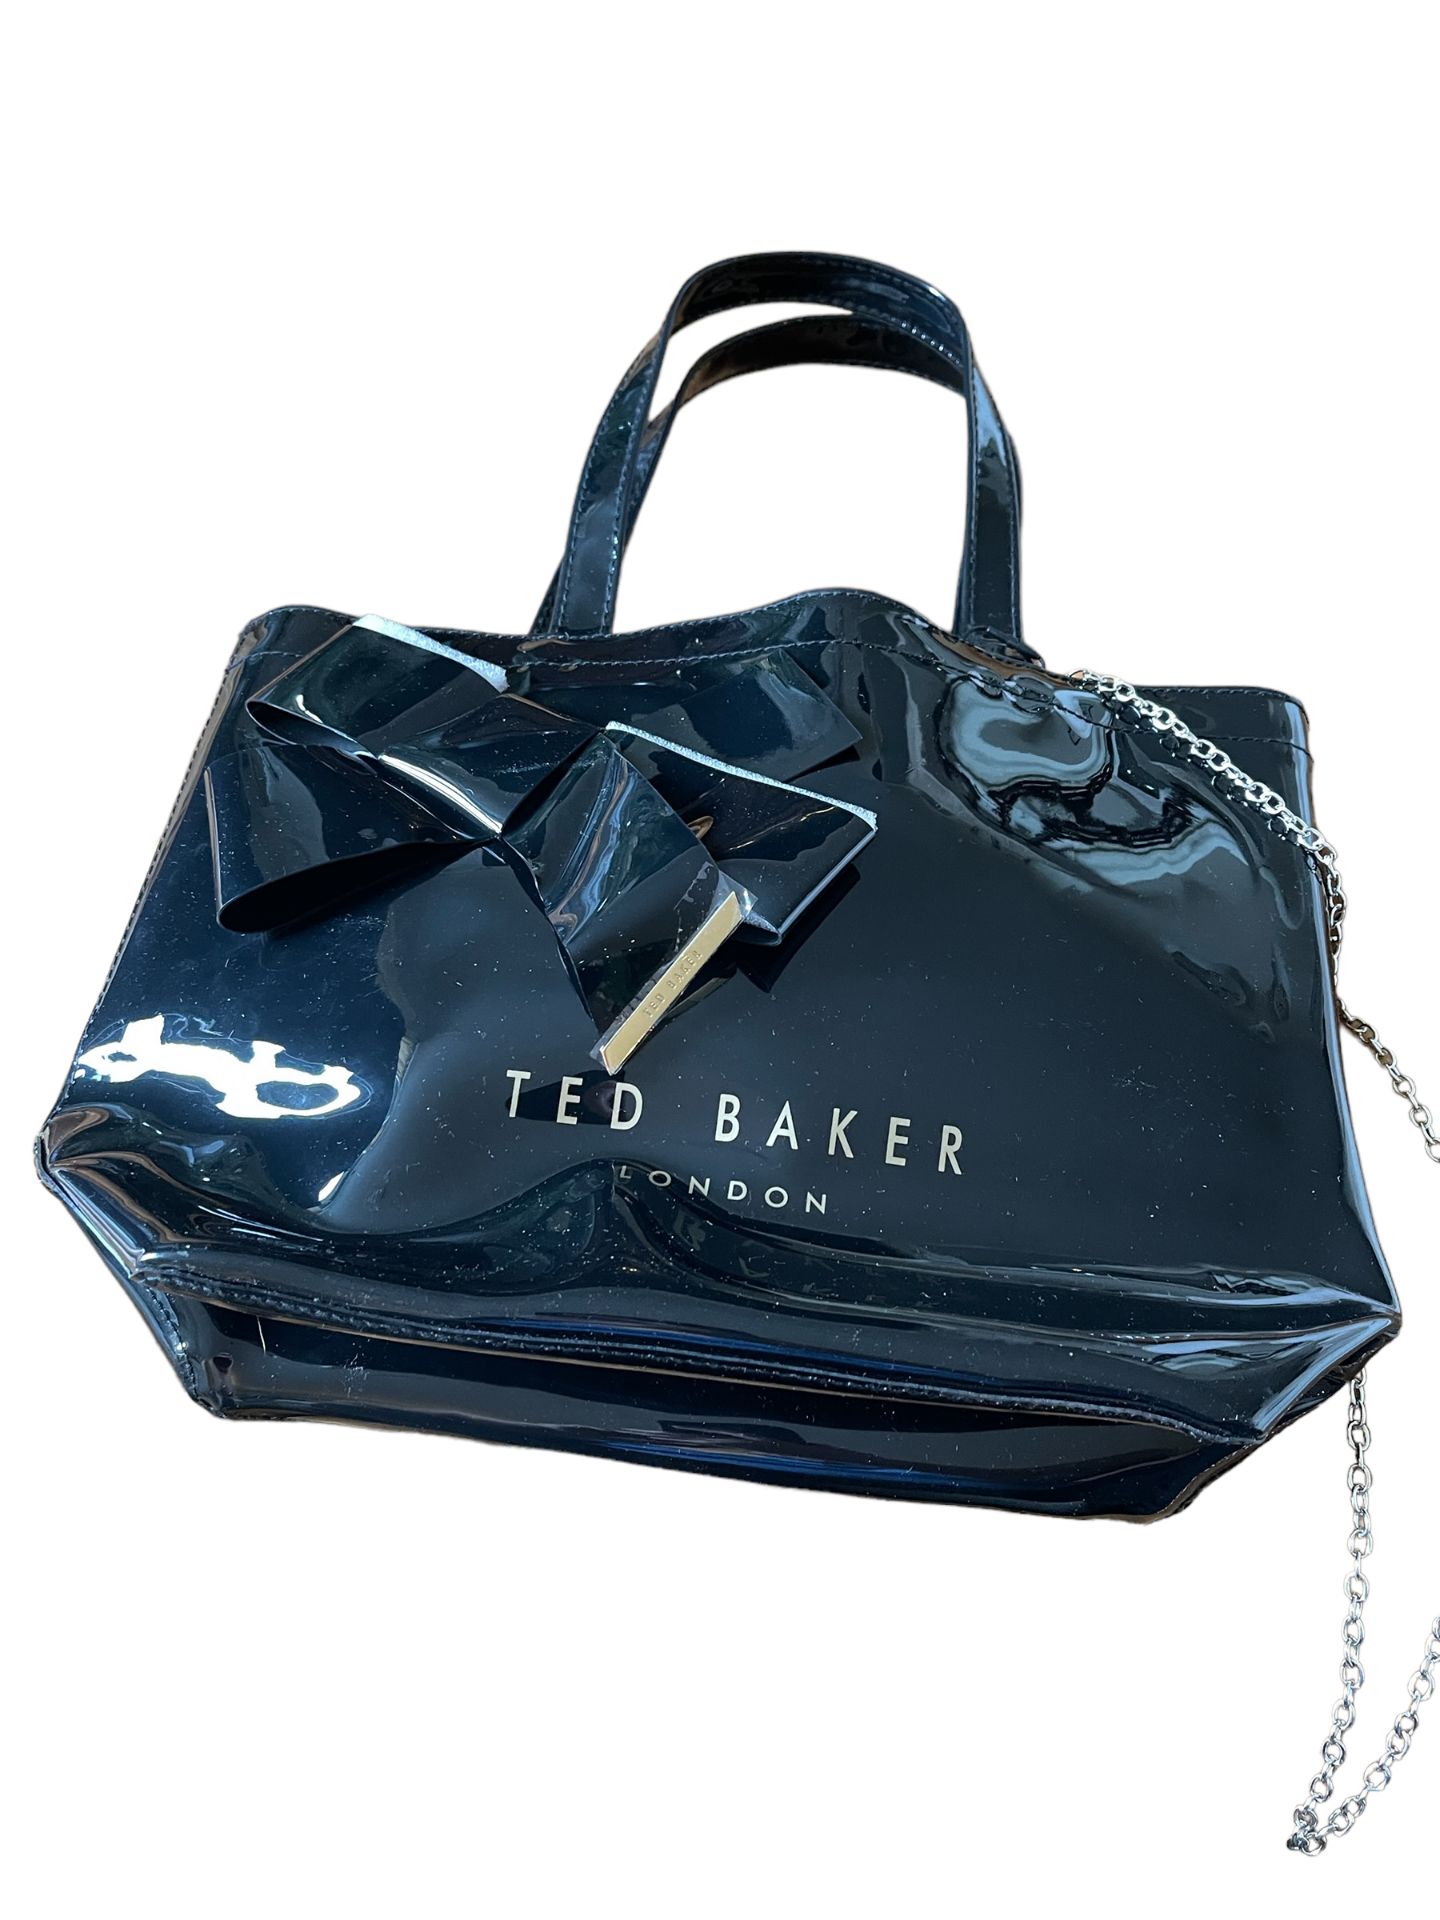 Ted Baker Brand New Bag with small Evening bag, unclaimed lost property - Image 2 of 6